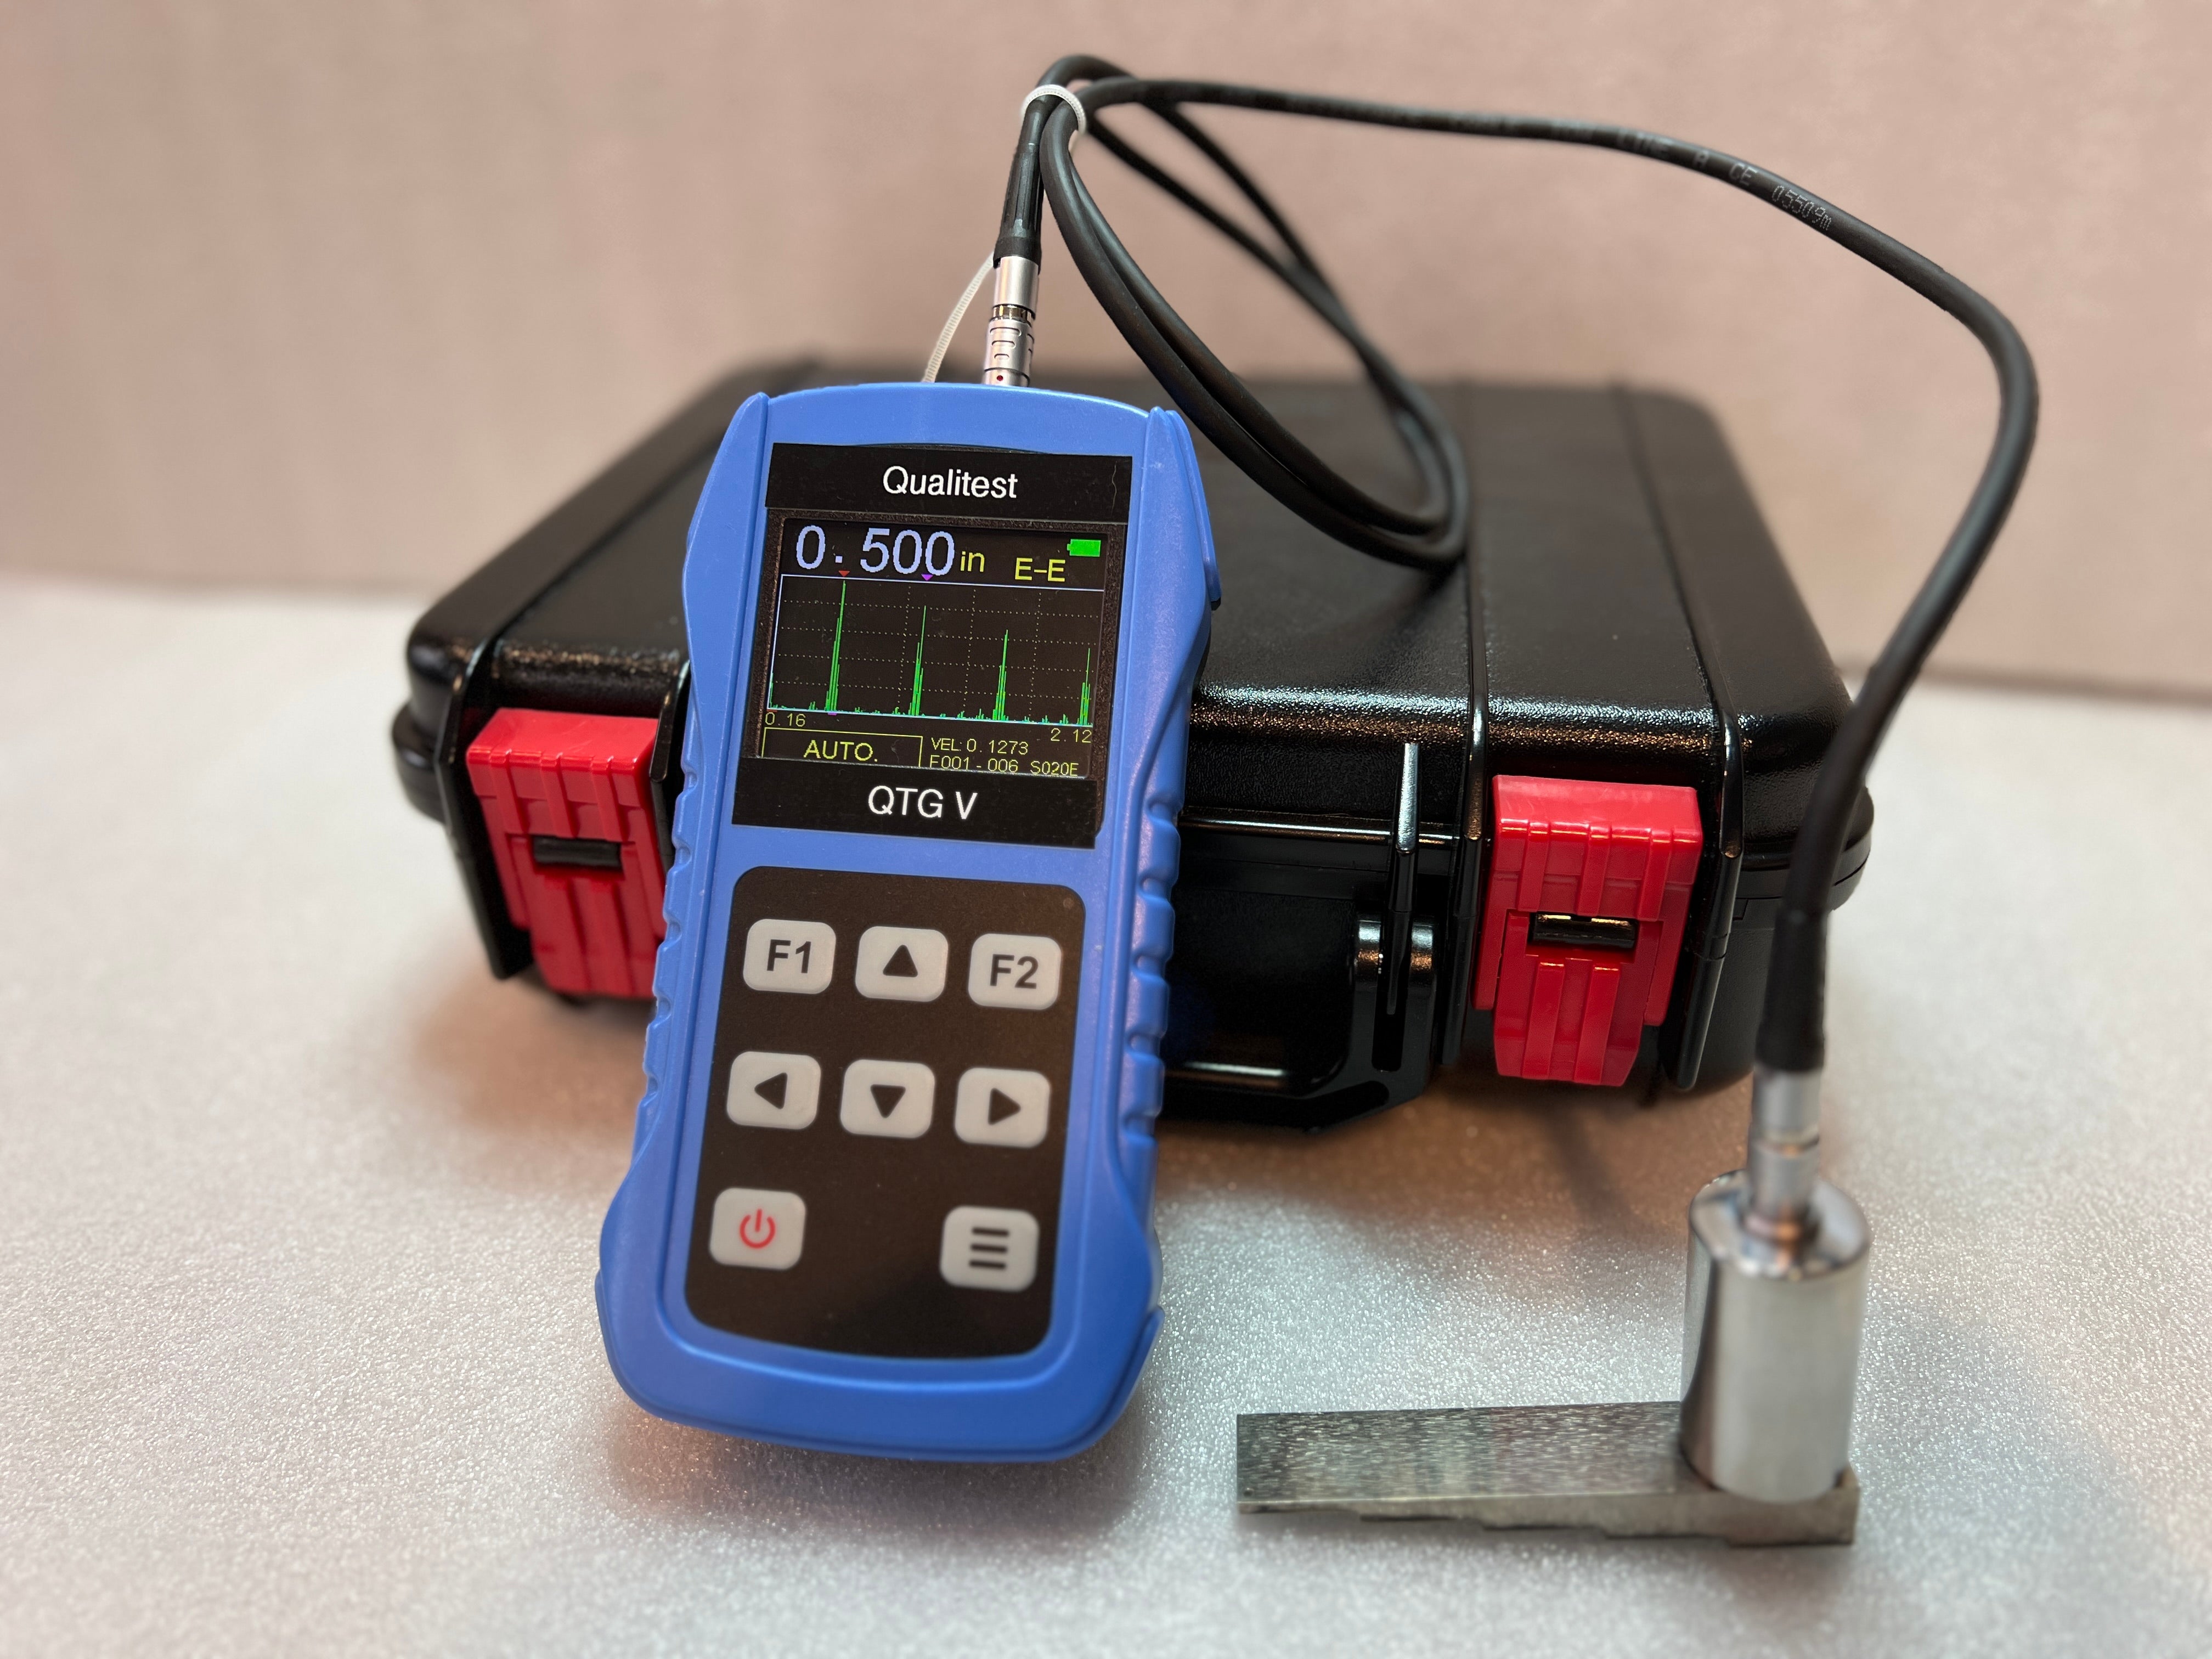 Electromagnetic Thickness Gauge QTG V - No Coupling Gel Required